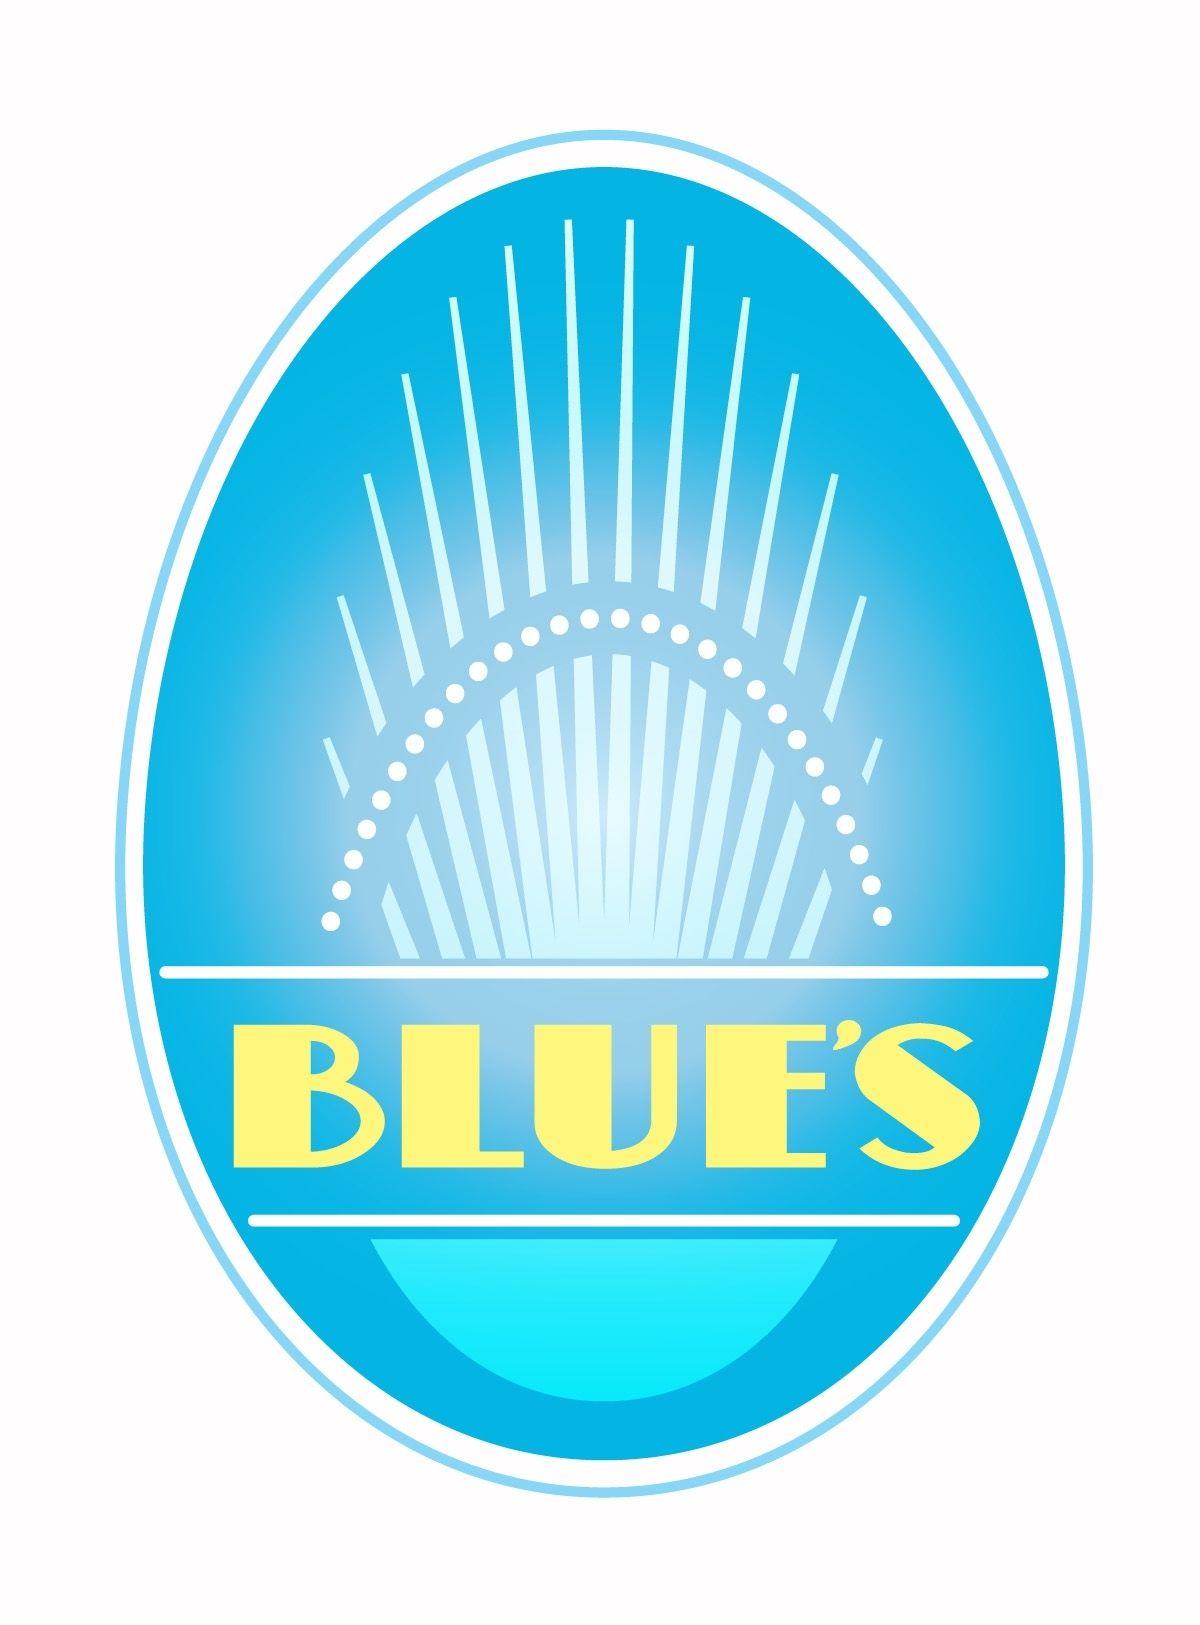 Blue Egg Logo - After Hours Networking At Blue's Egg With WA WM Chamber. Wauwatosa